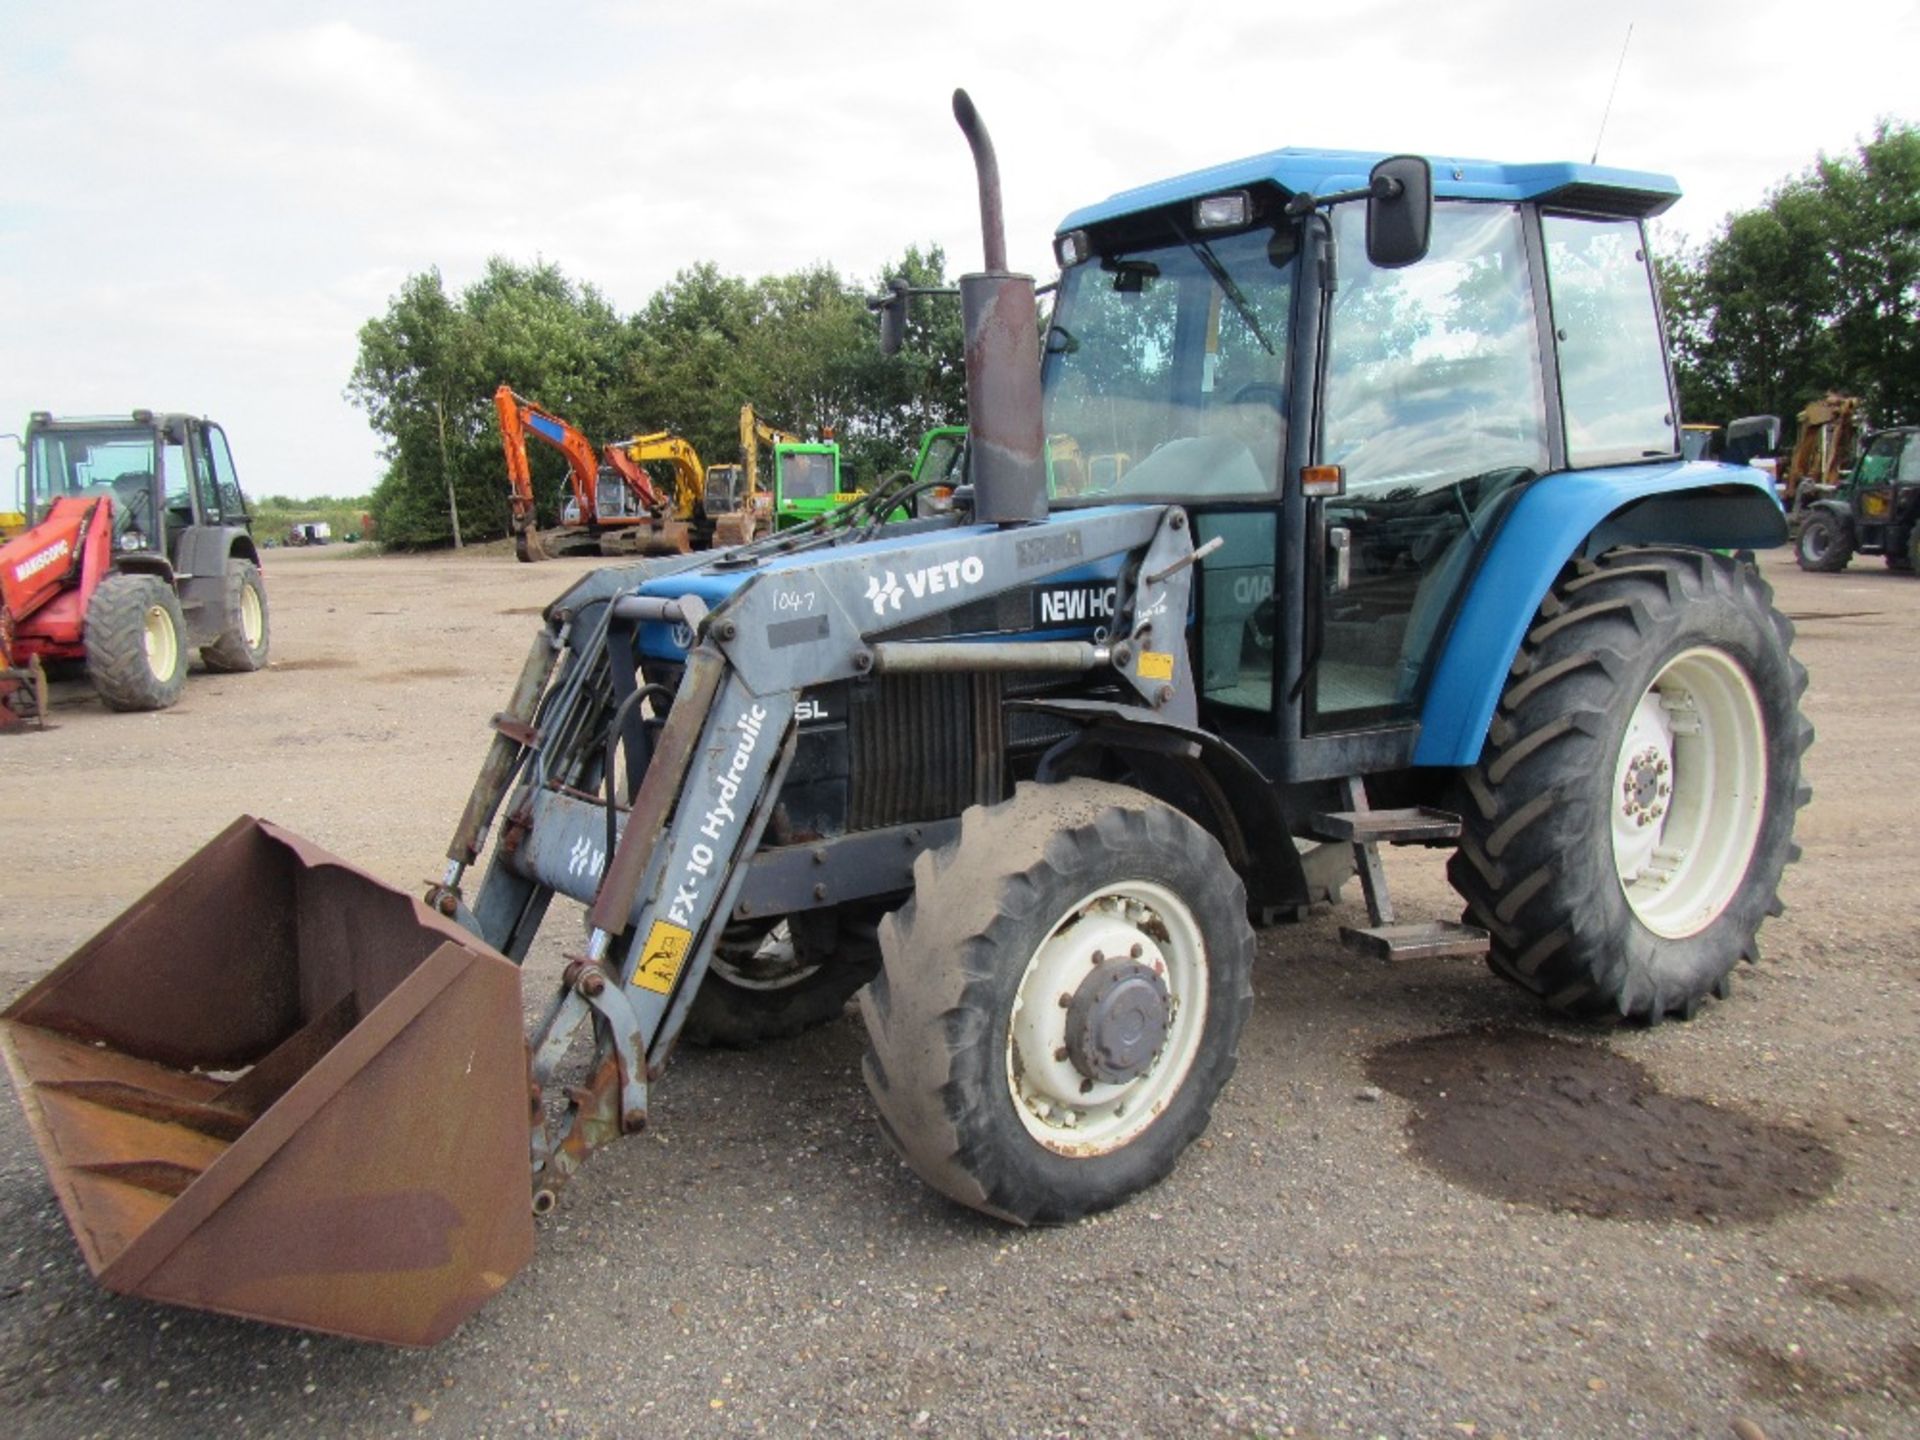 New Holland 5640SL Tractor with Front Loader. V5 has been applied for. Regd 30/1/97.